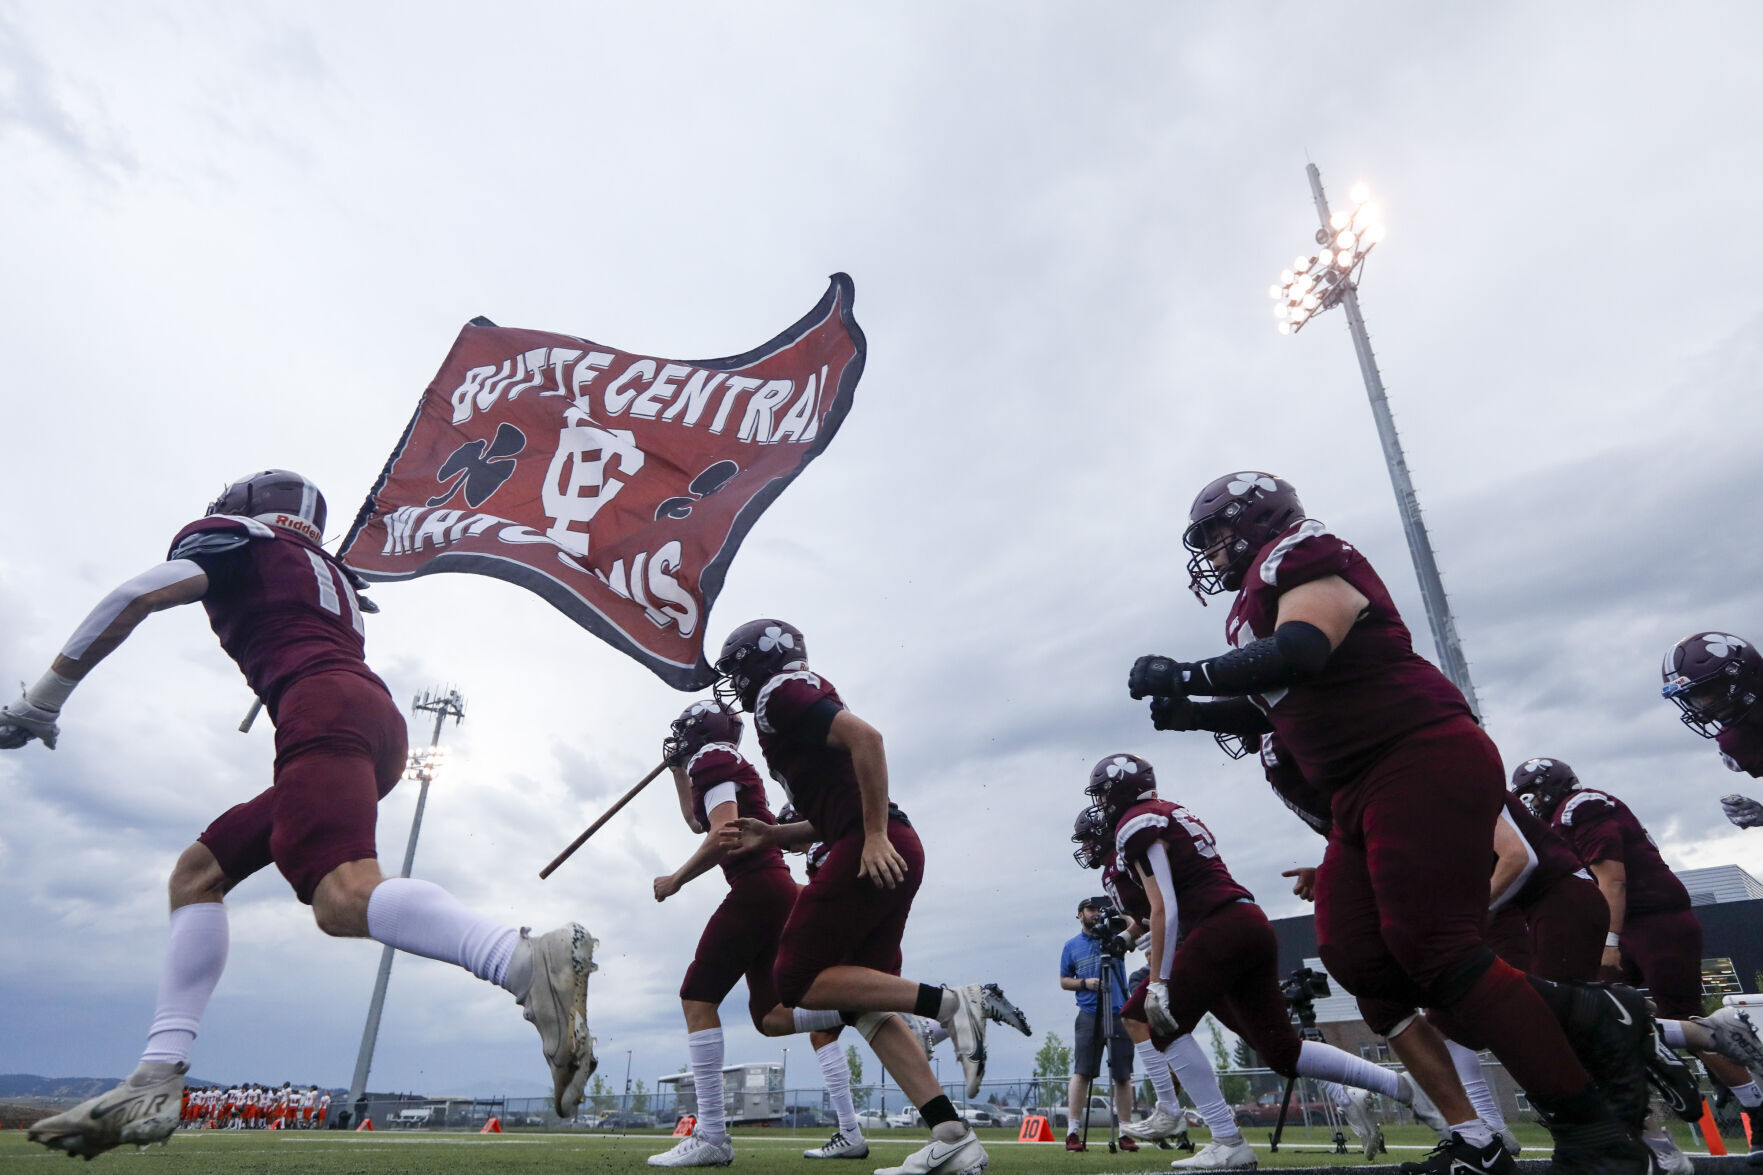 Butte Central Maroons commit to Class A despite low enrollment challenges